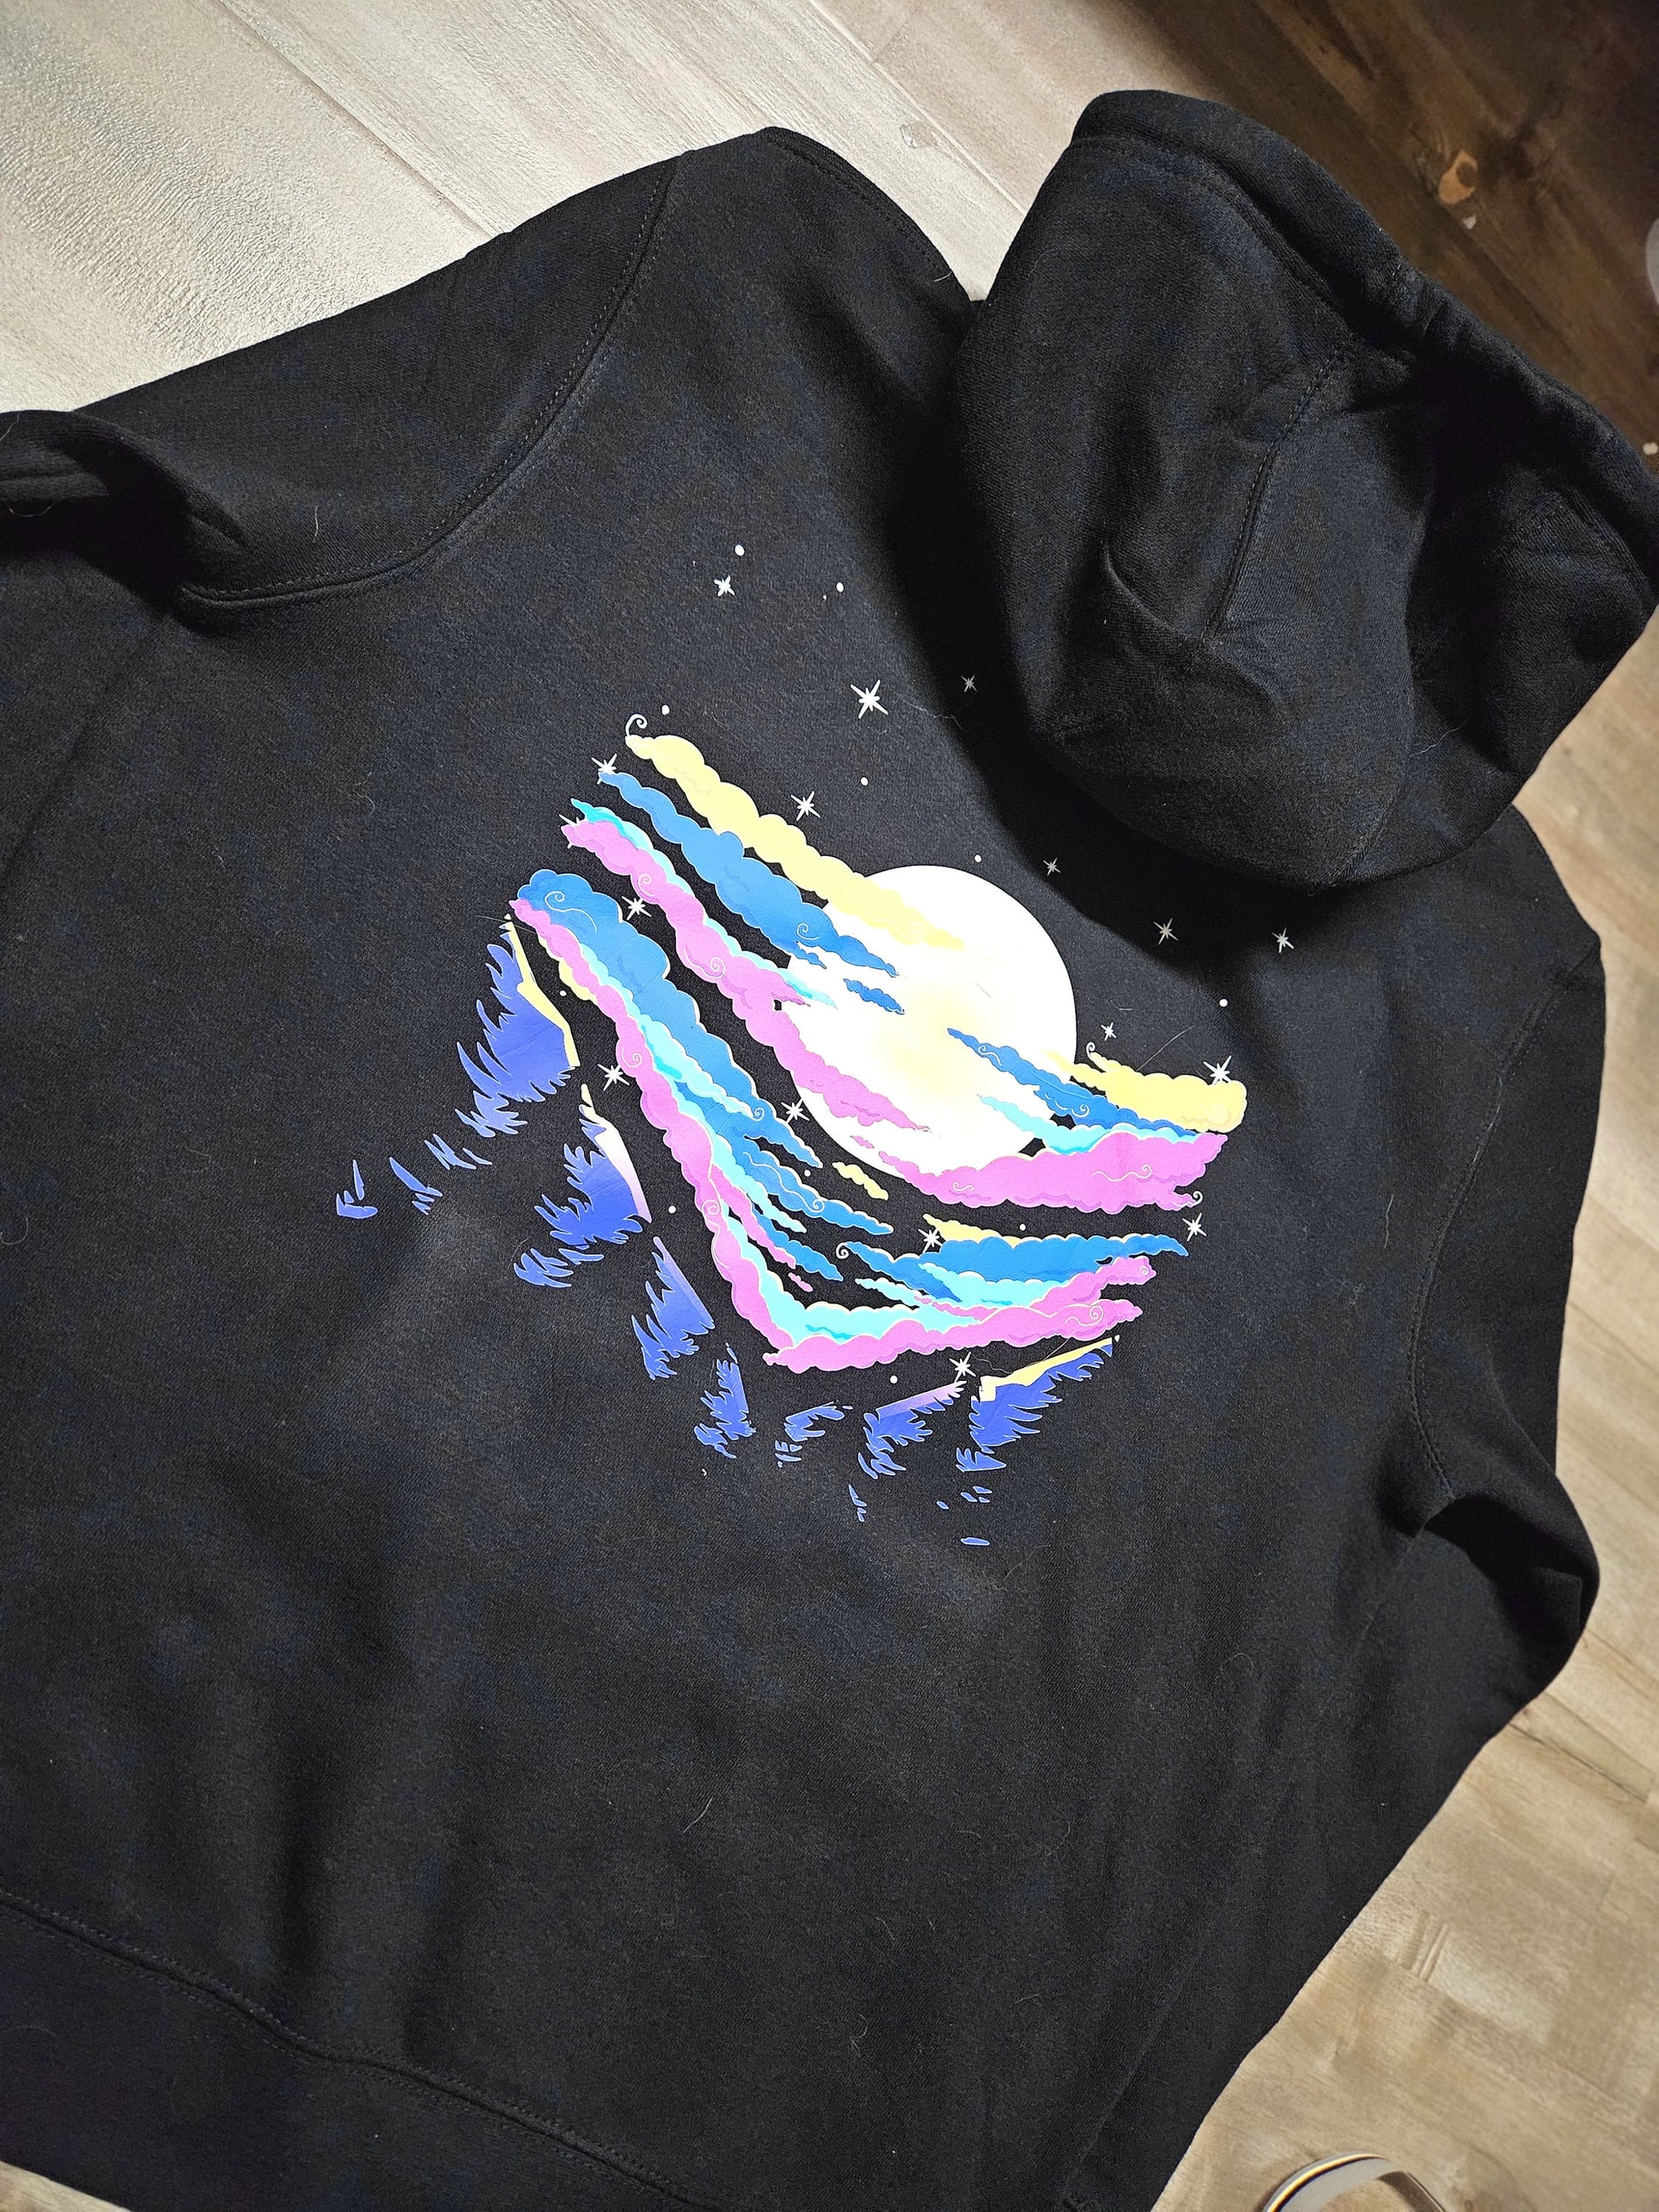 Dreamy Wanderer Hoodie - Moon, Clouds, Stars, Mountains, Nature, Colorful Dreamcore Vibe